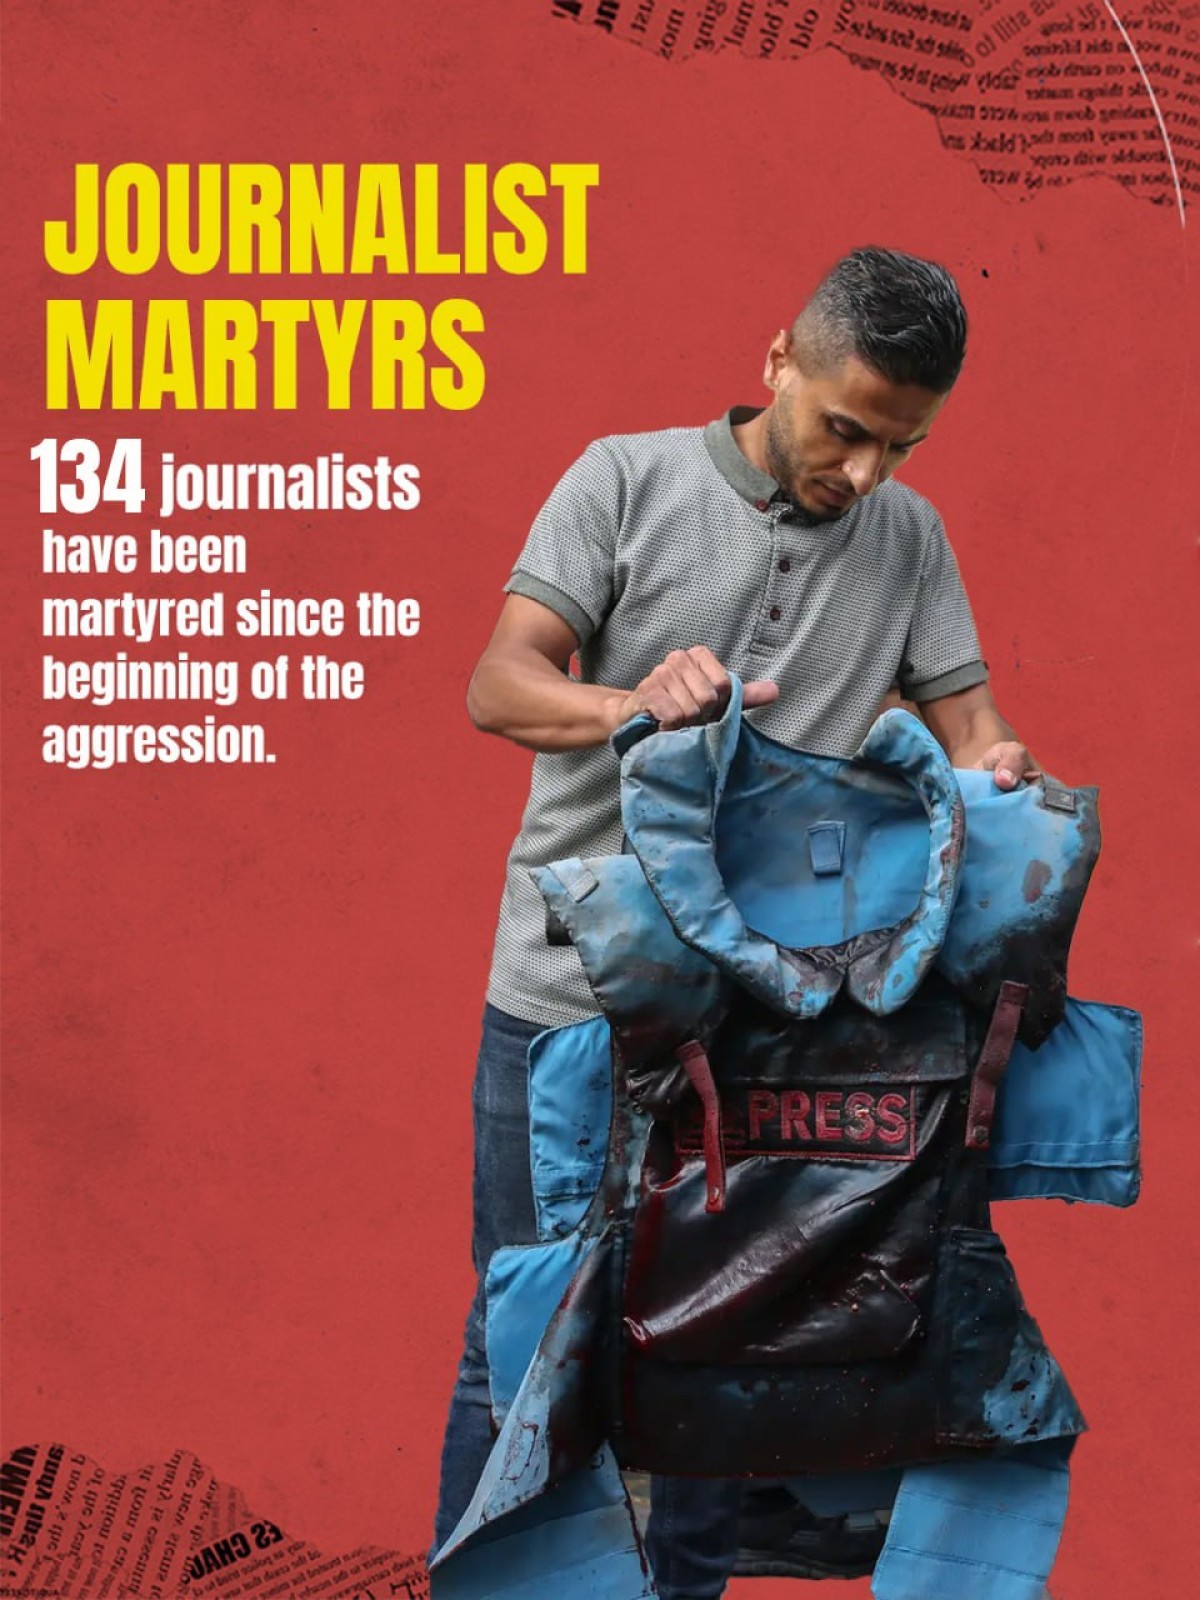 JOURNALIST MARTYRS 134 journalists have been martyred since the beginning of the aggression.